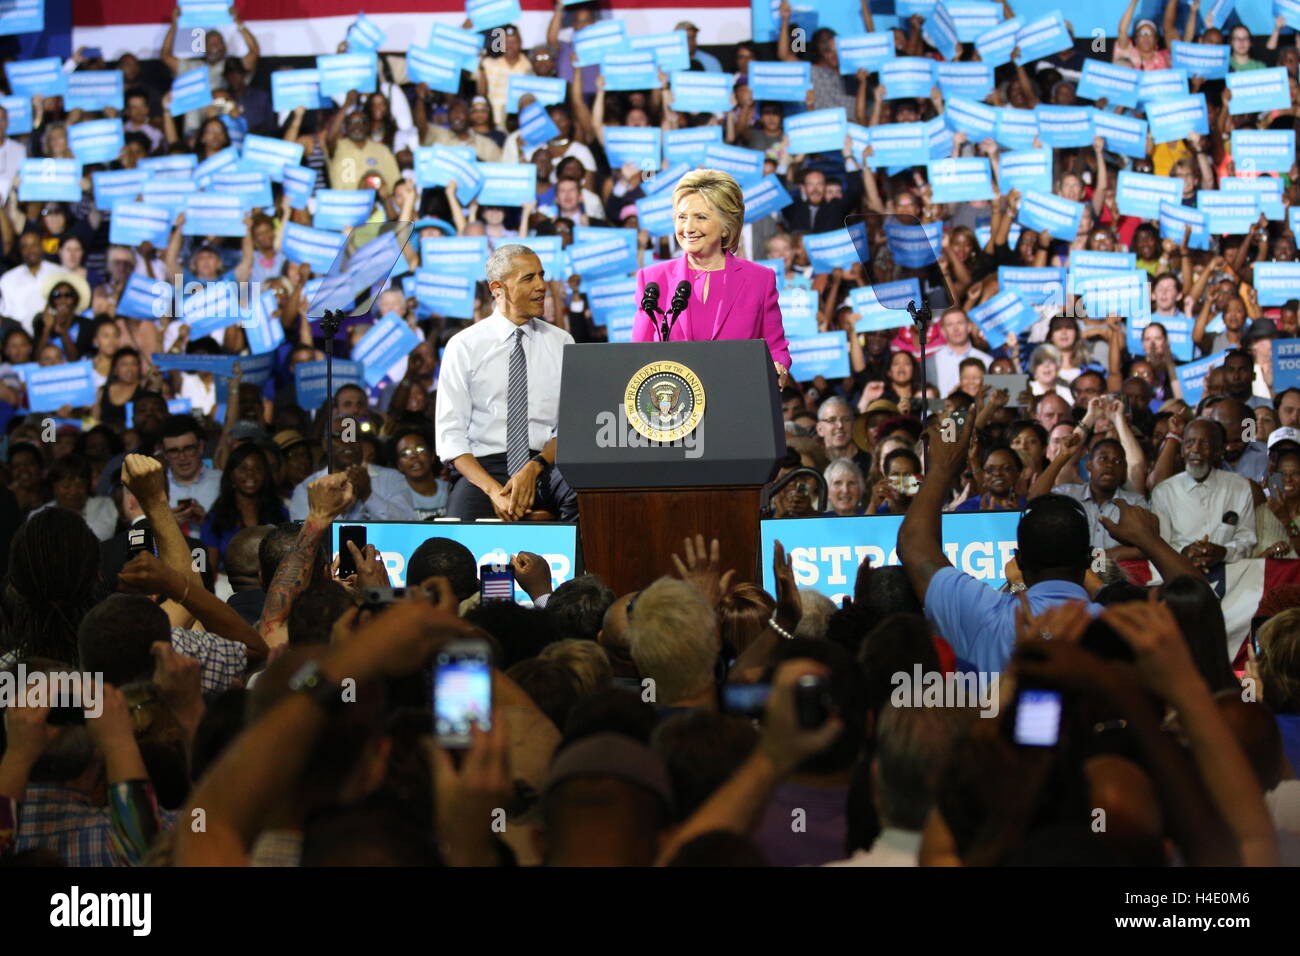 Presidential candidate Hillary Diane Rodham Clinton campaigns in Charlotte, NC at the Charlotte Convention Center on July 5th, 2016 with President Barack Obama standing nearby showing support. Stock Photo